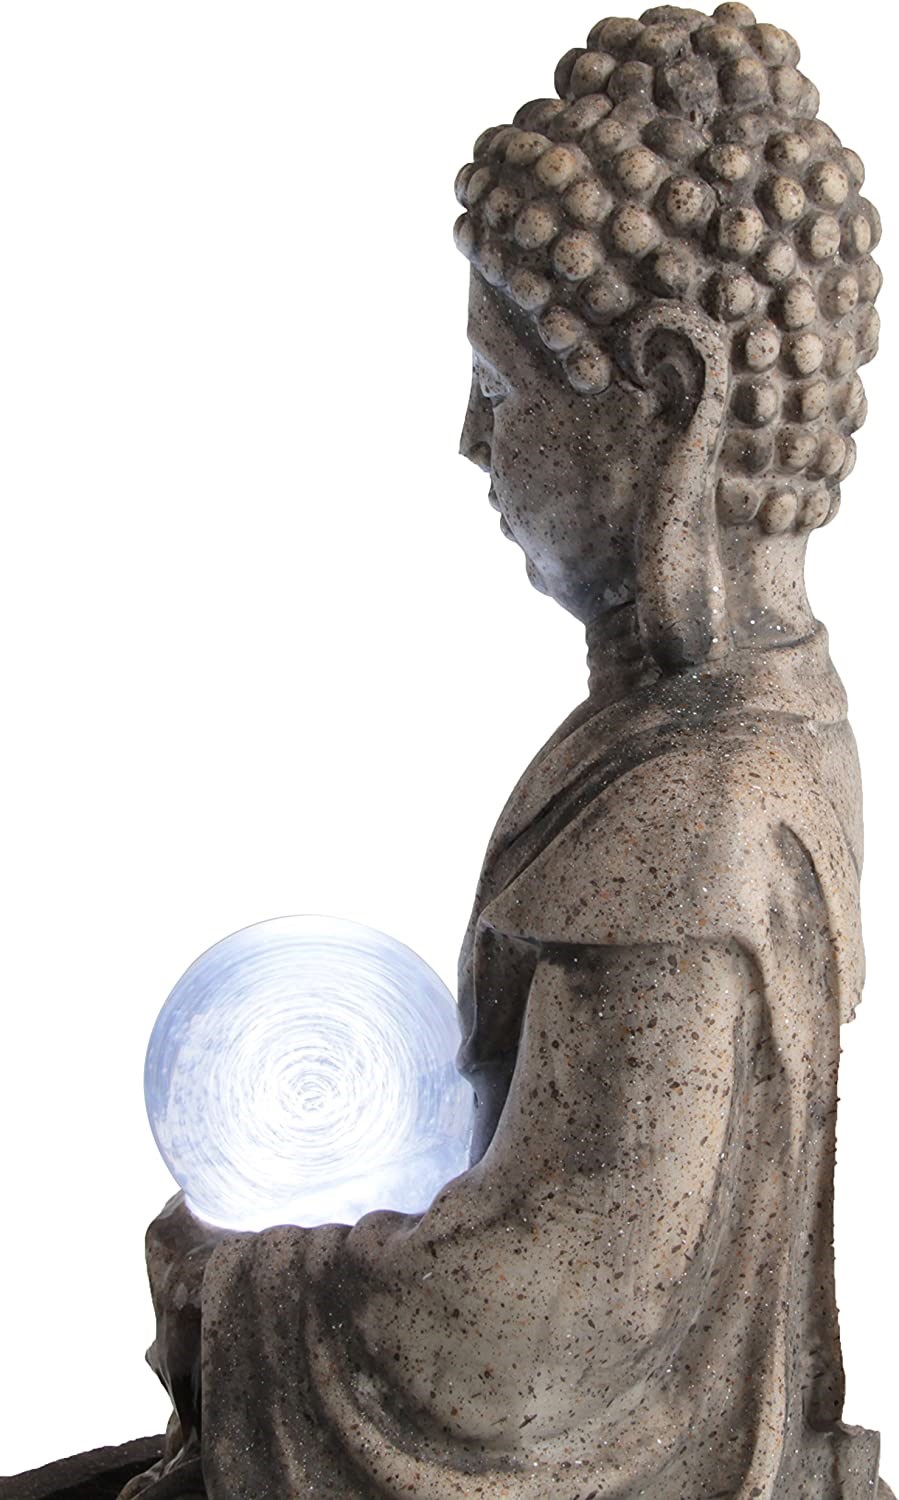 Buddha & Crystal Ball Water Feature w/ LED Lights | Ambienté